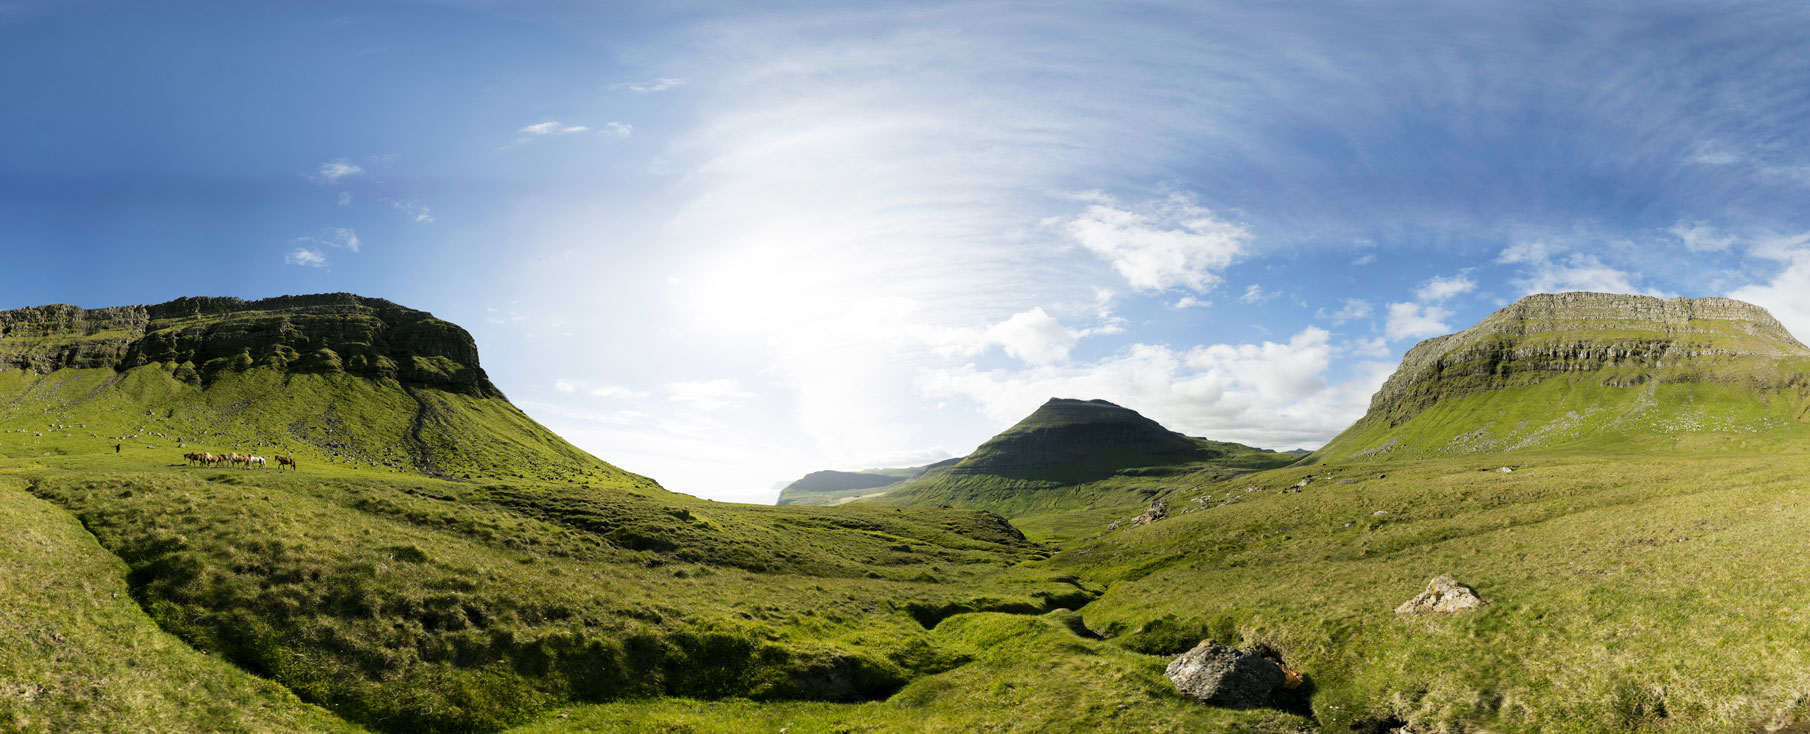 Panoramic Image from 3D environment capture in the Faroe Islands